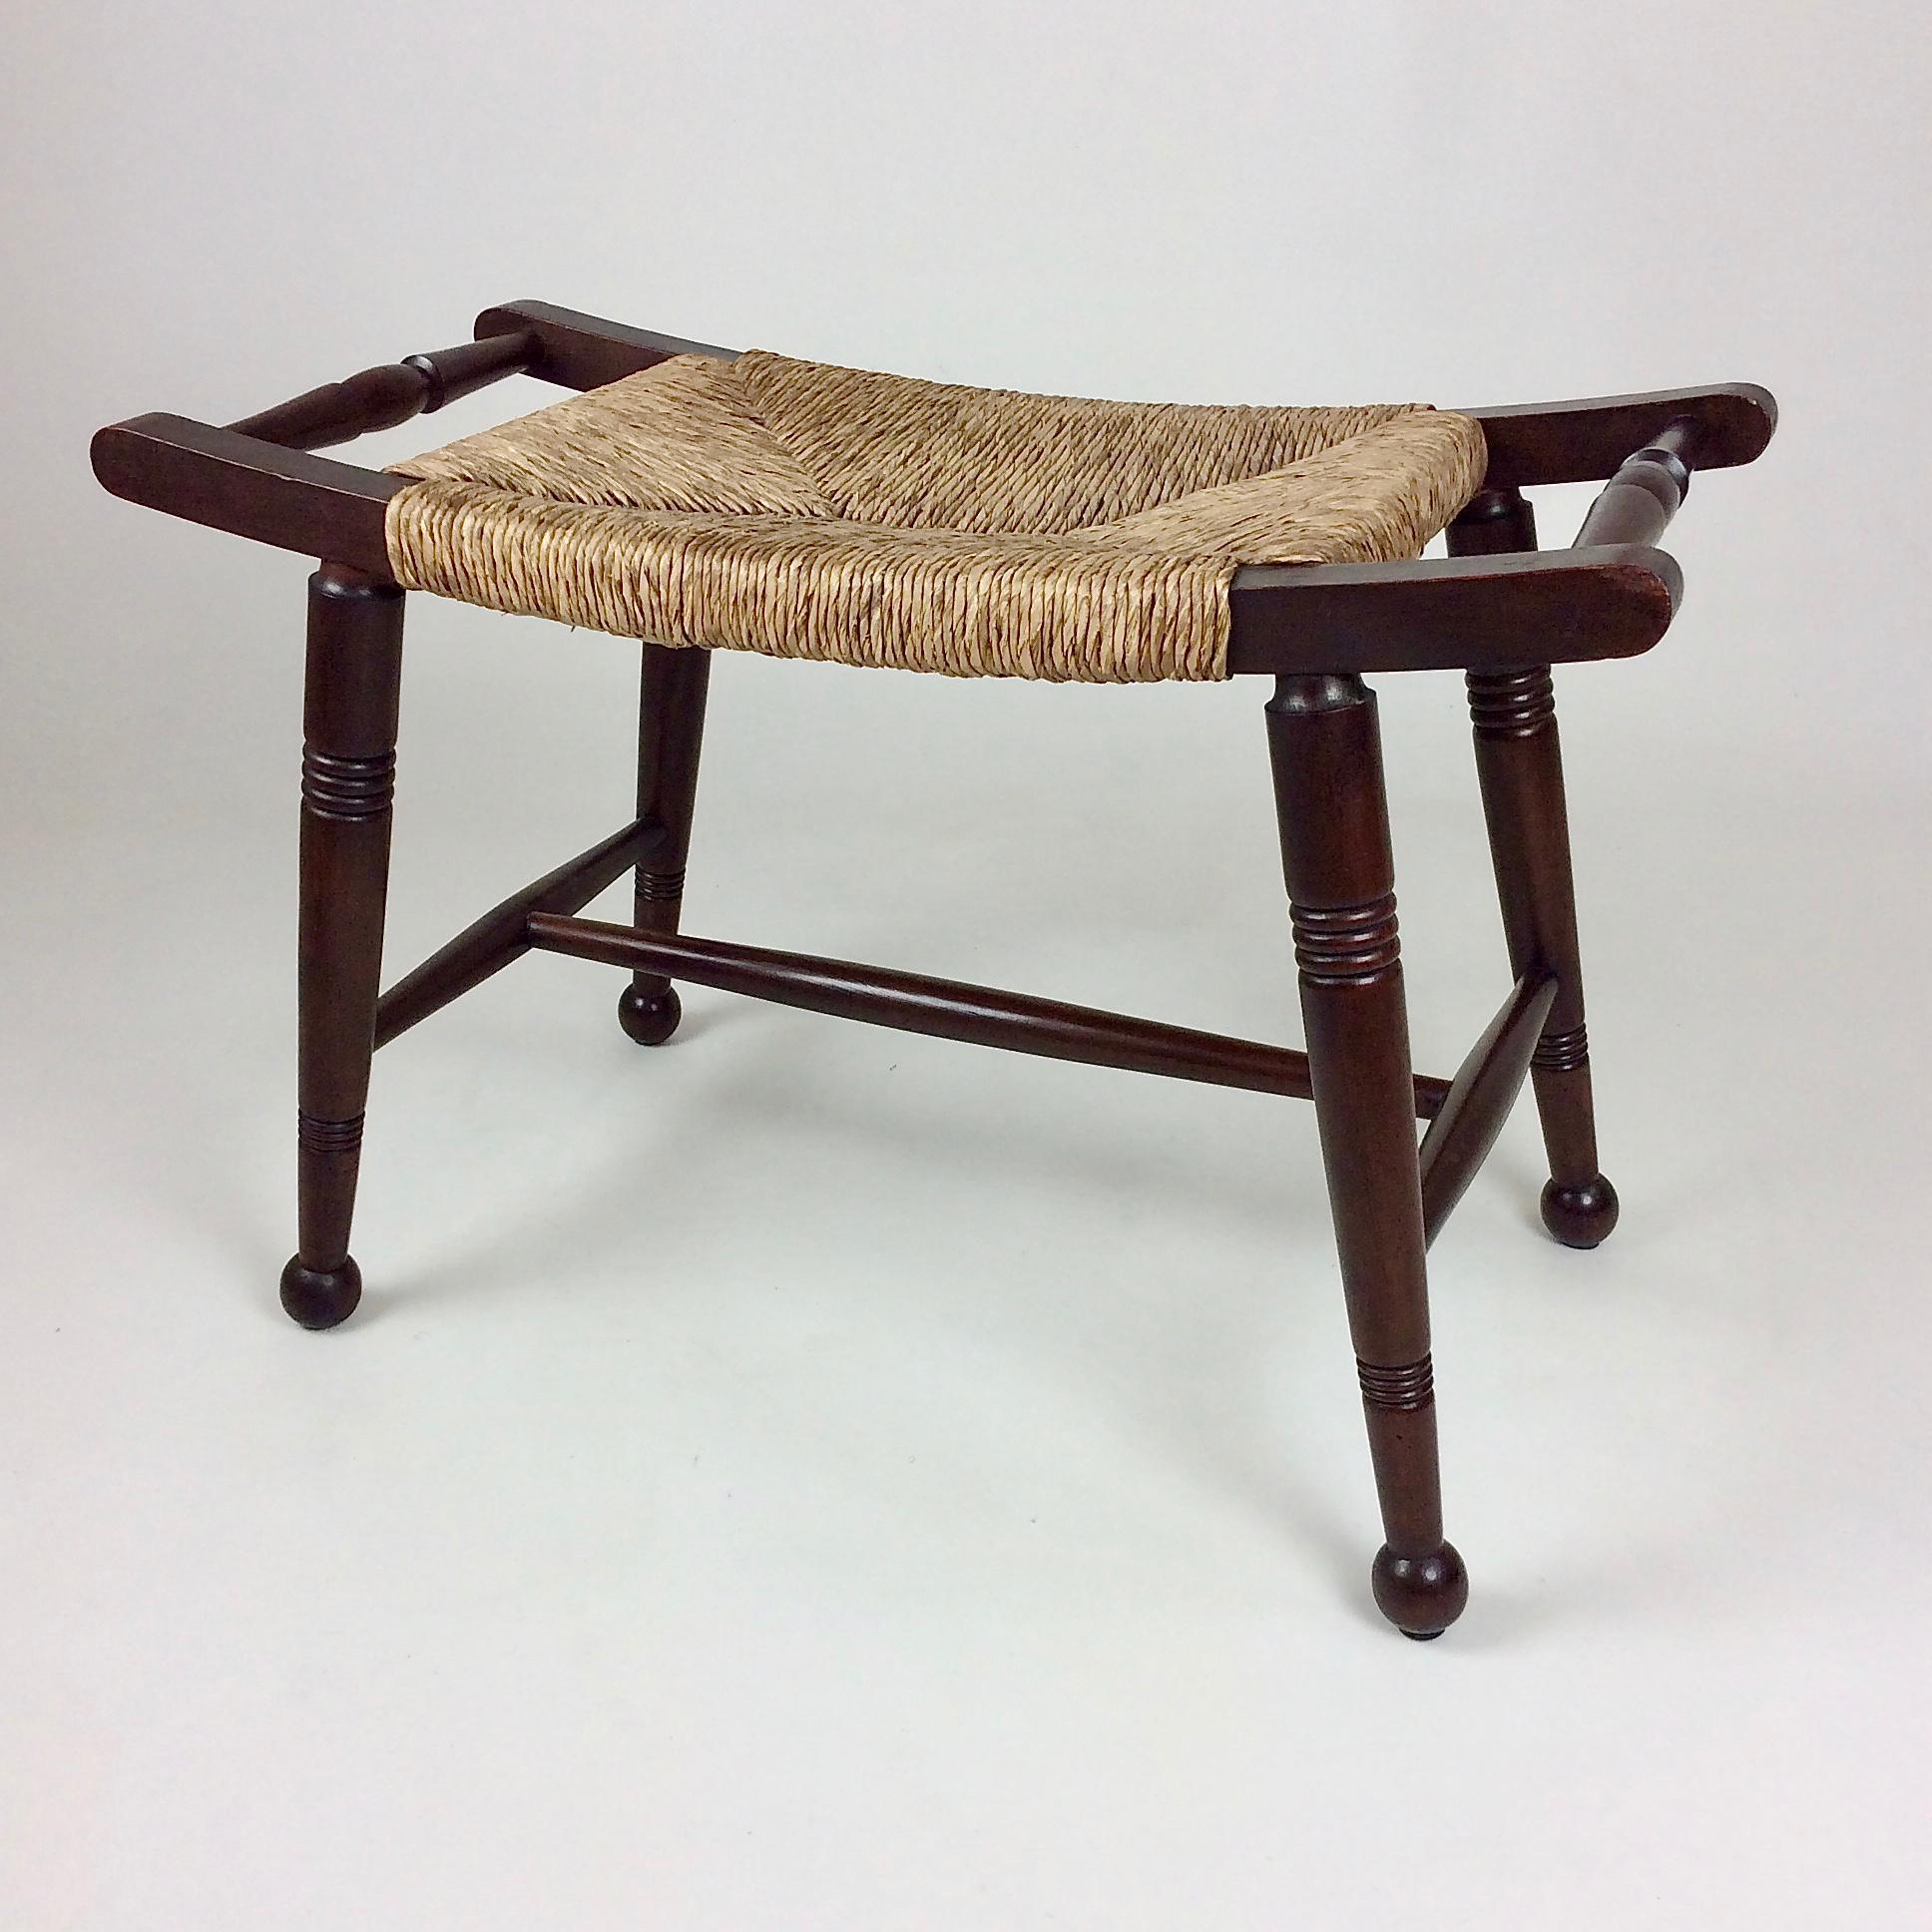 Arts and Crafts Arts & Crafts Wood and Straw Stool, Early 20th Century, United Kingdom For Sale